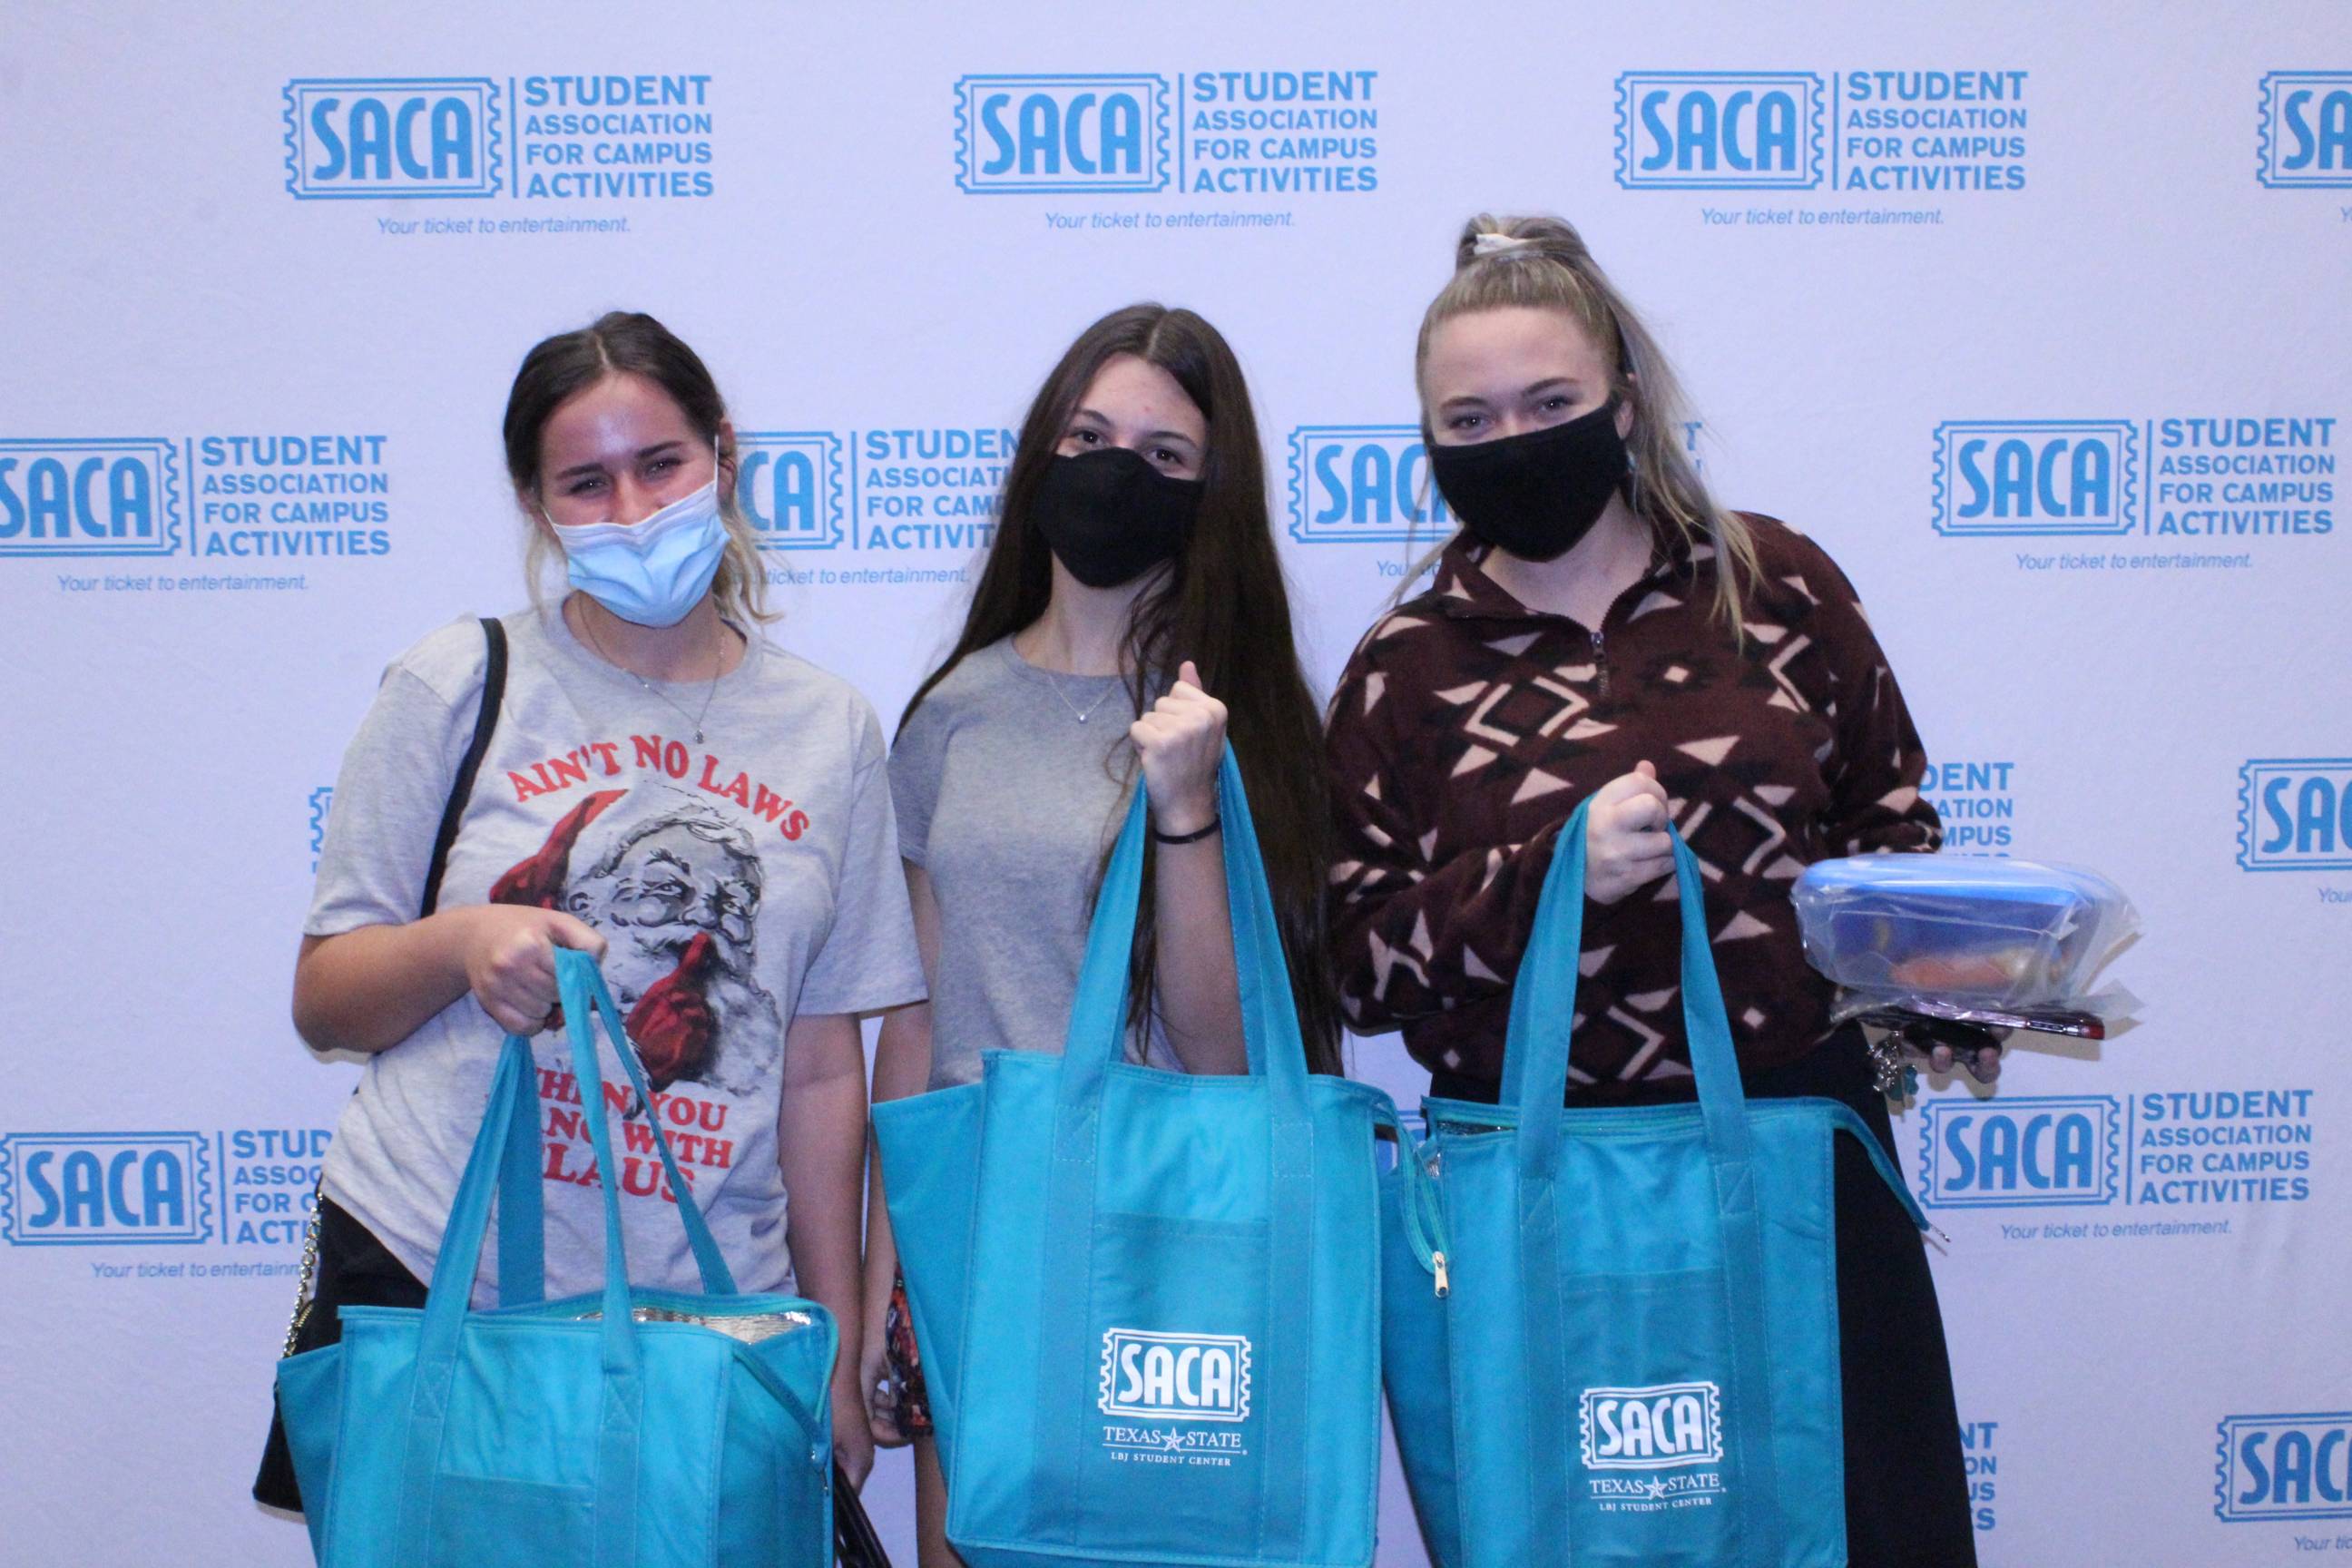 Three students holding SACA Grocery Bags